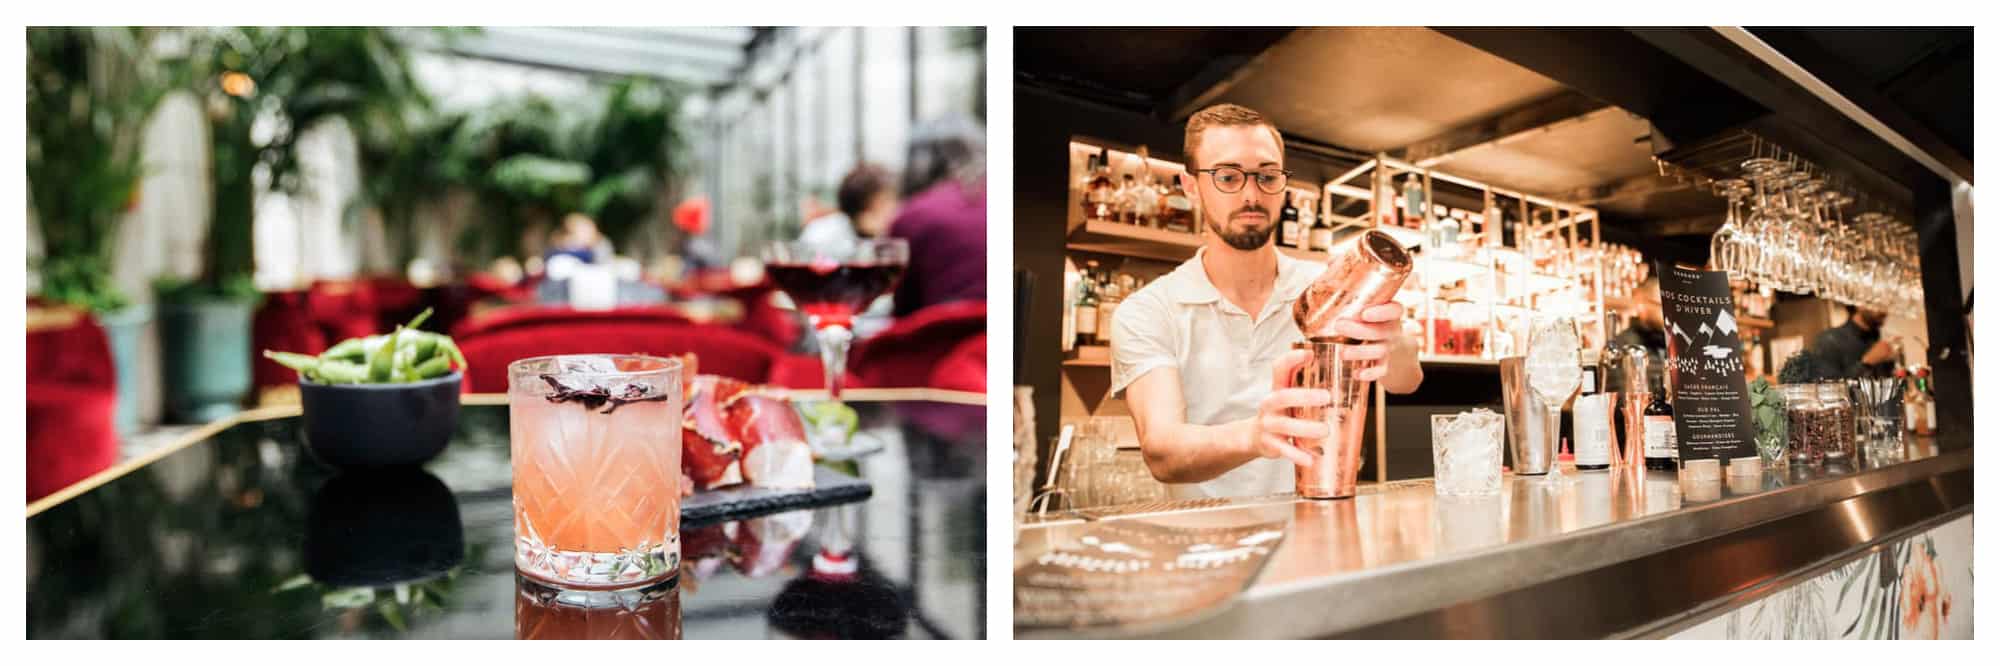 On left: A peachy floral cocktail sits in a sparkling glass at Le Très Particulier, the bar of Hôtel Particulier in Montmartre. On right: A bartender shakes up cocktails under the orange glow of the lights at the Terrass Hotel, a rooftop bar in Paris' 18th arrondissement. 